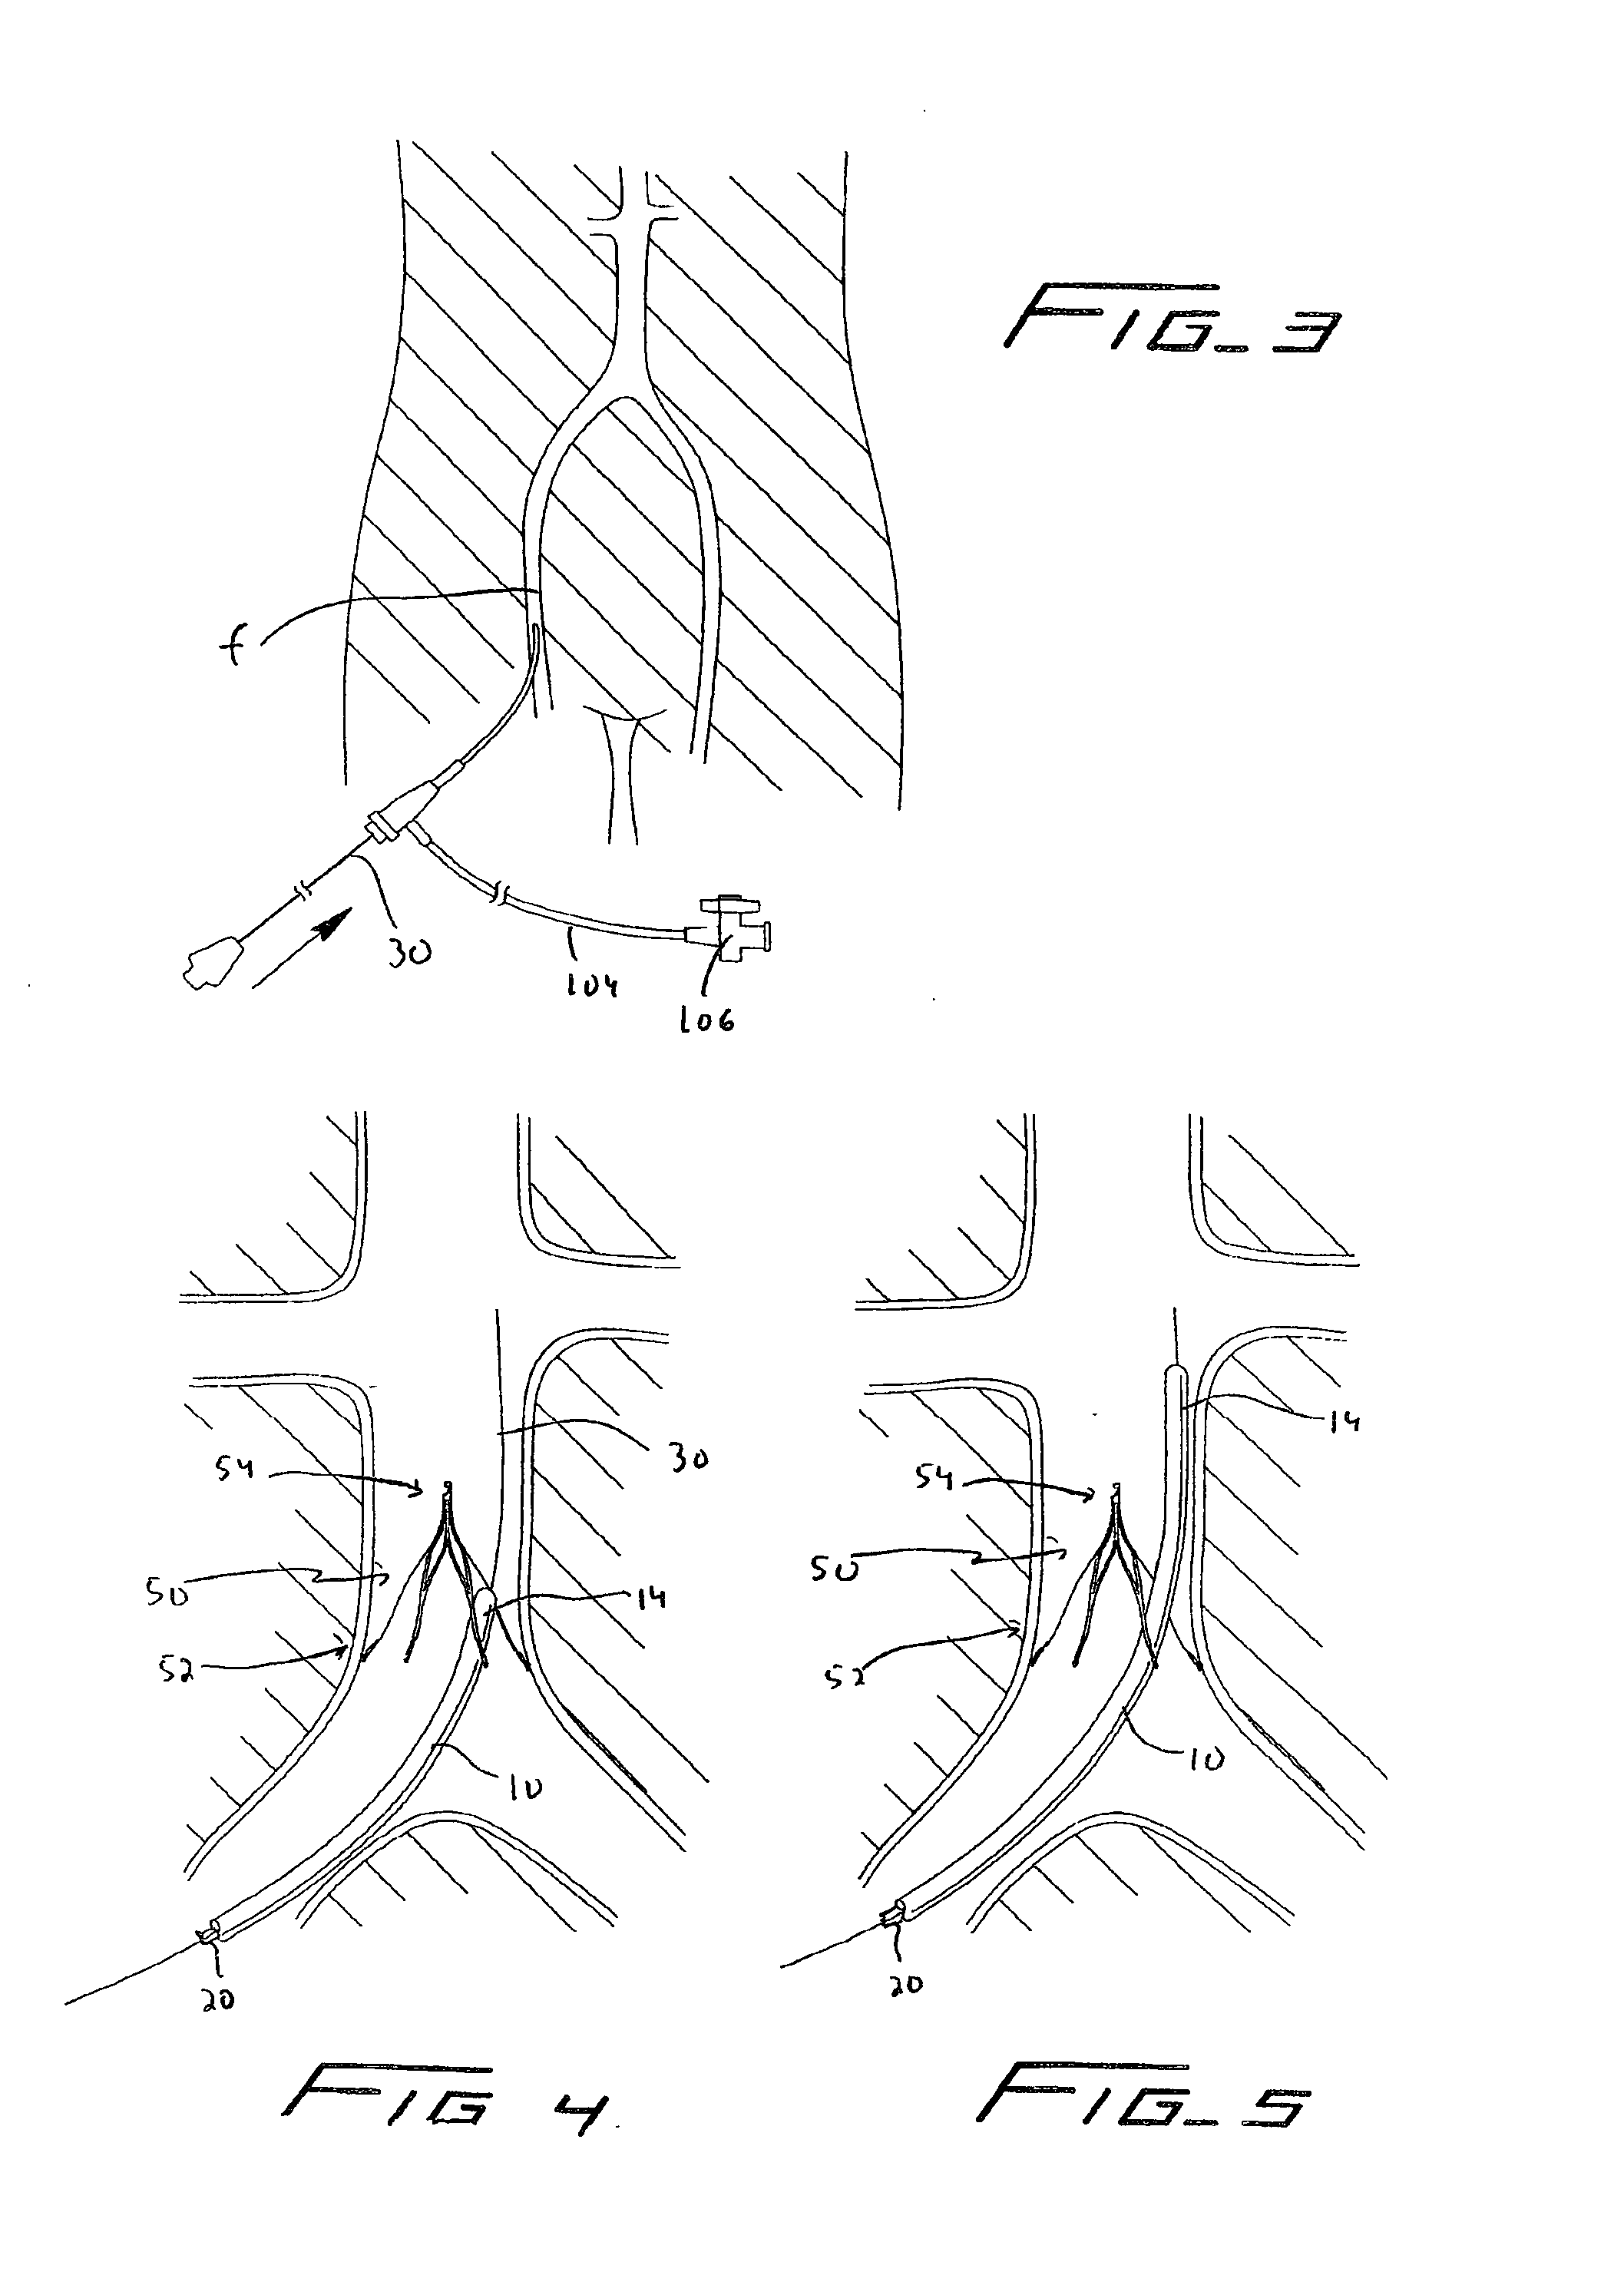 Method of removing a vein filter